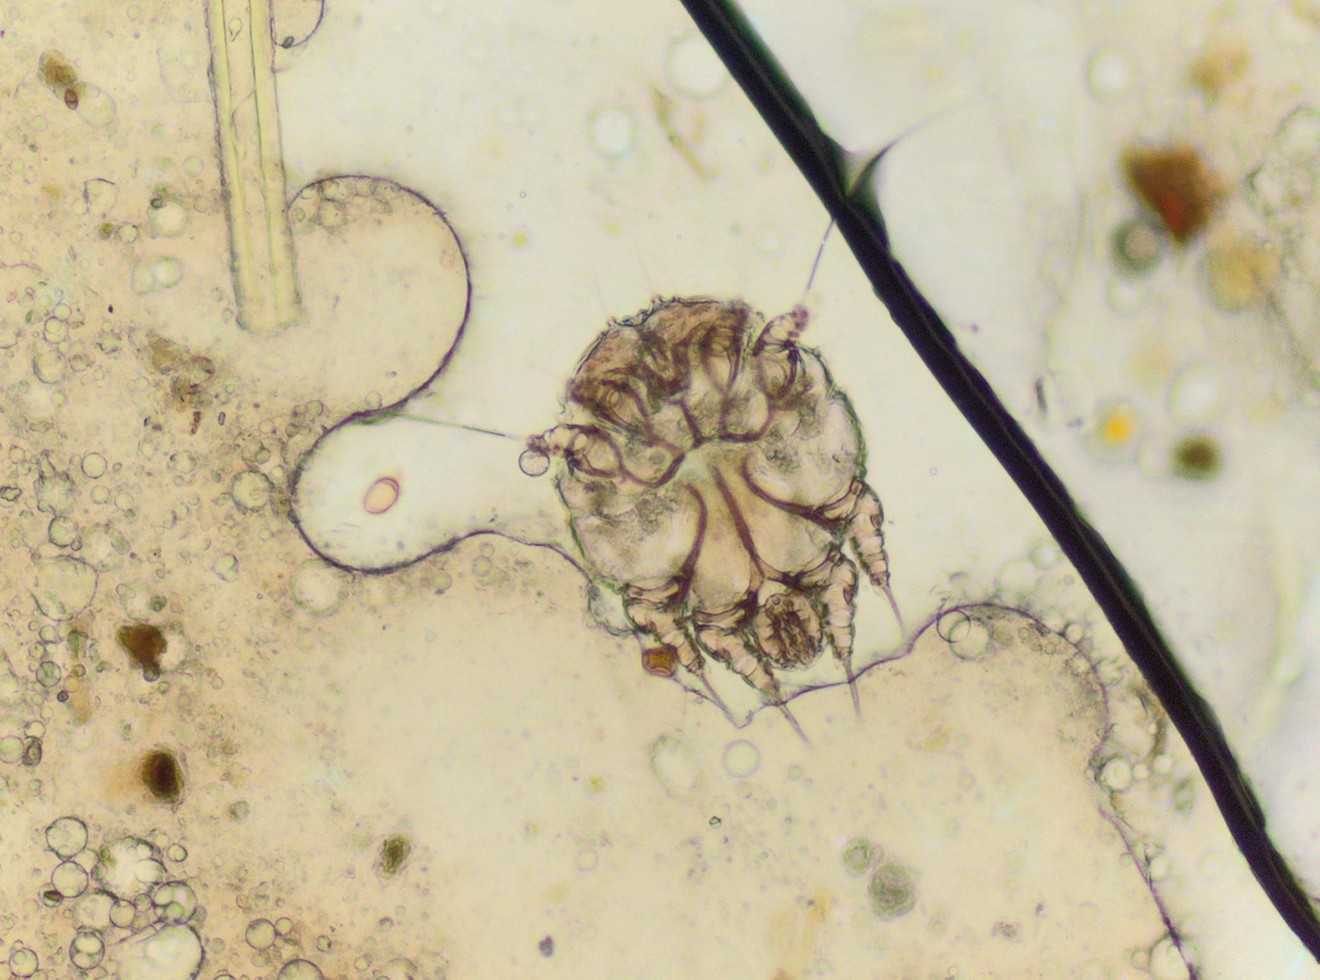 A microscopic view of the mite that causes scabies.